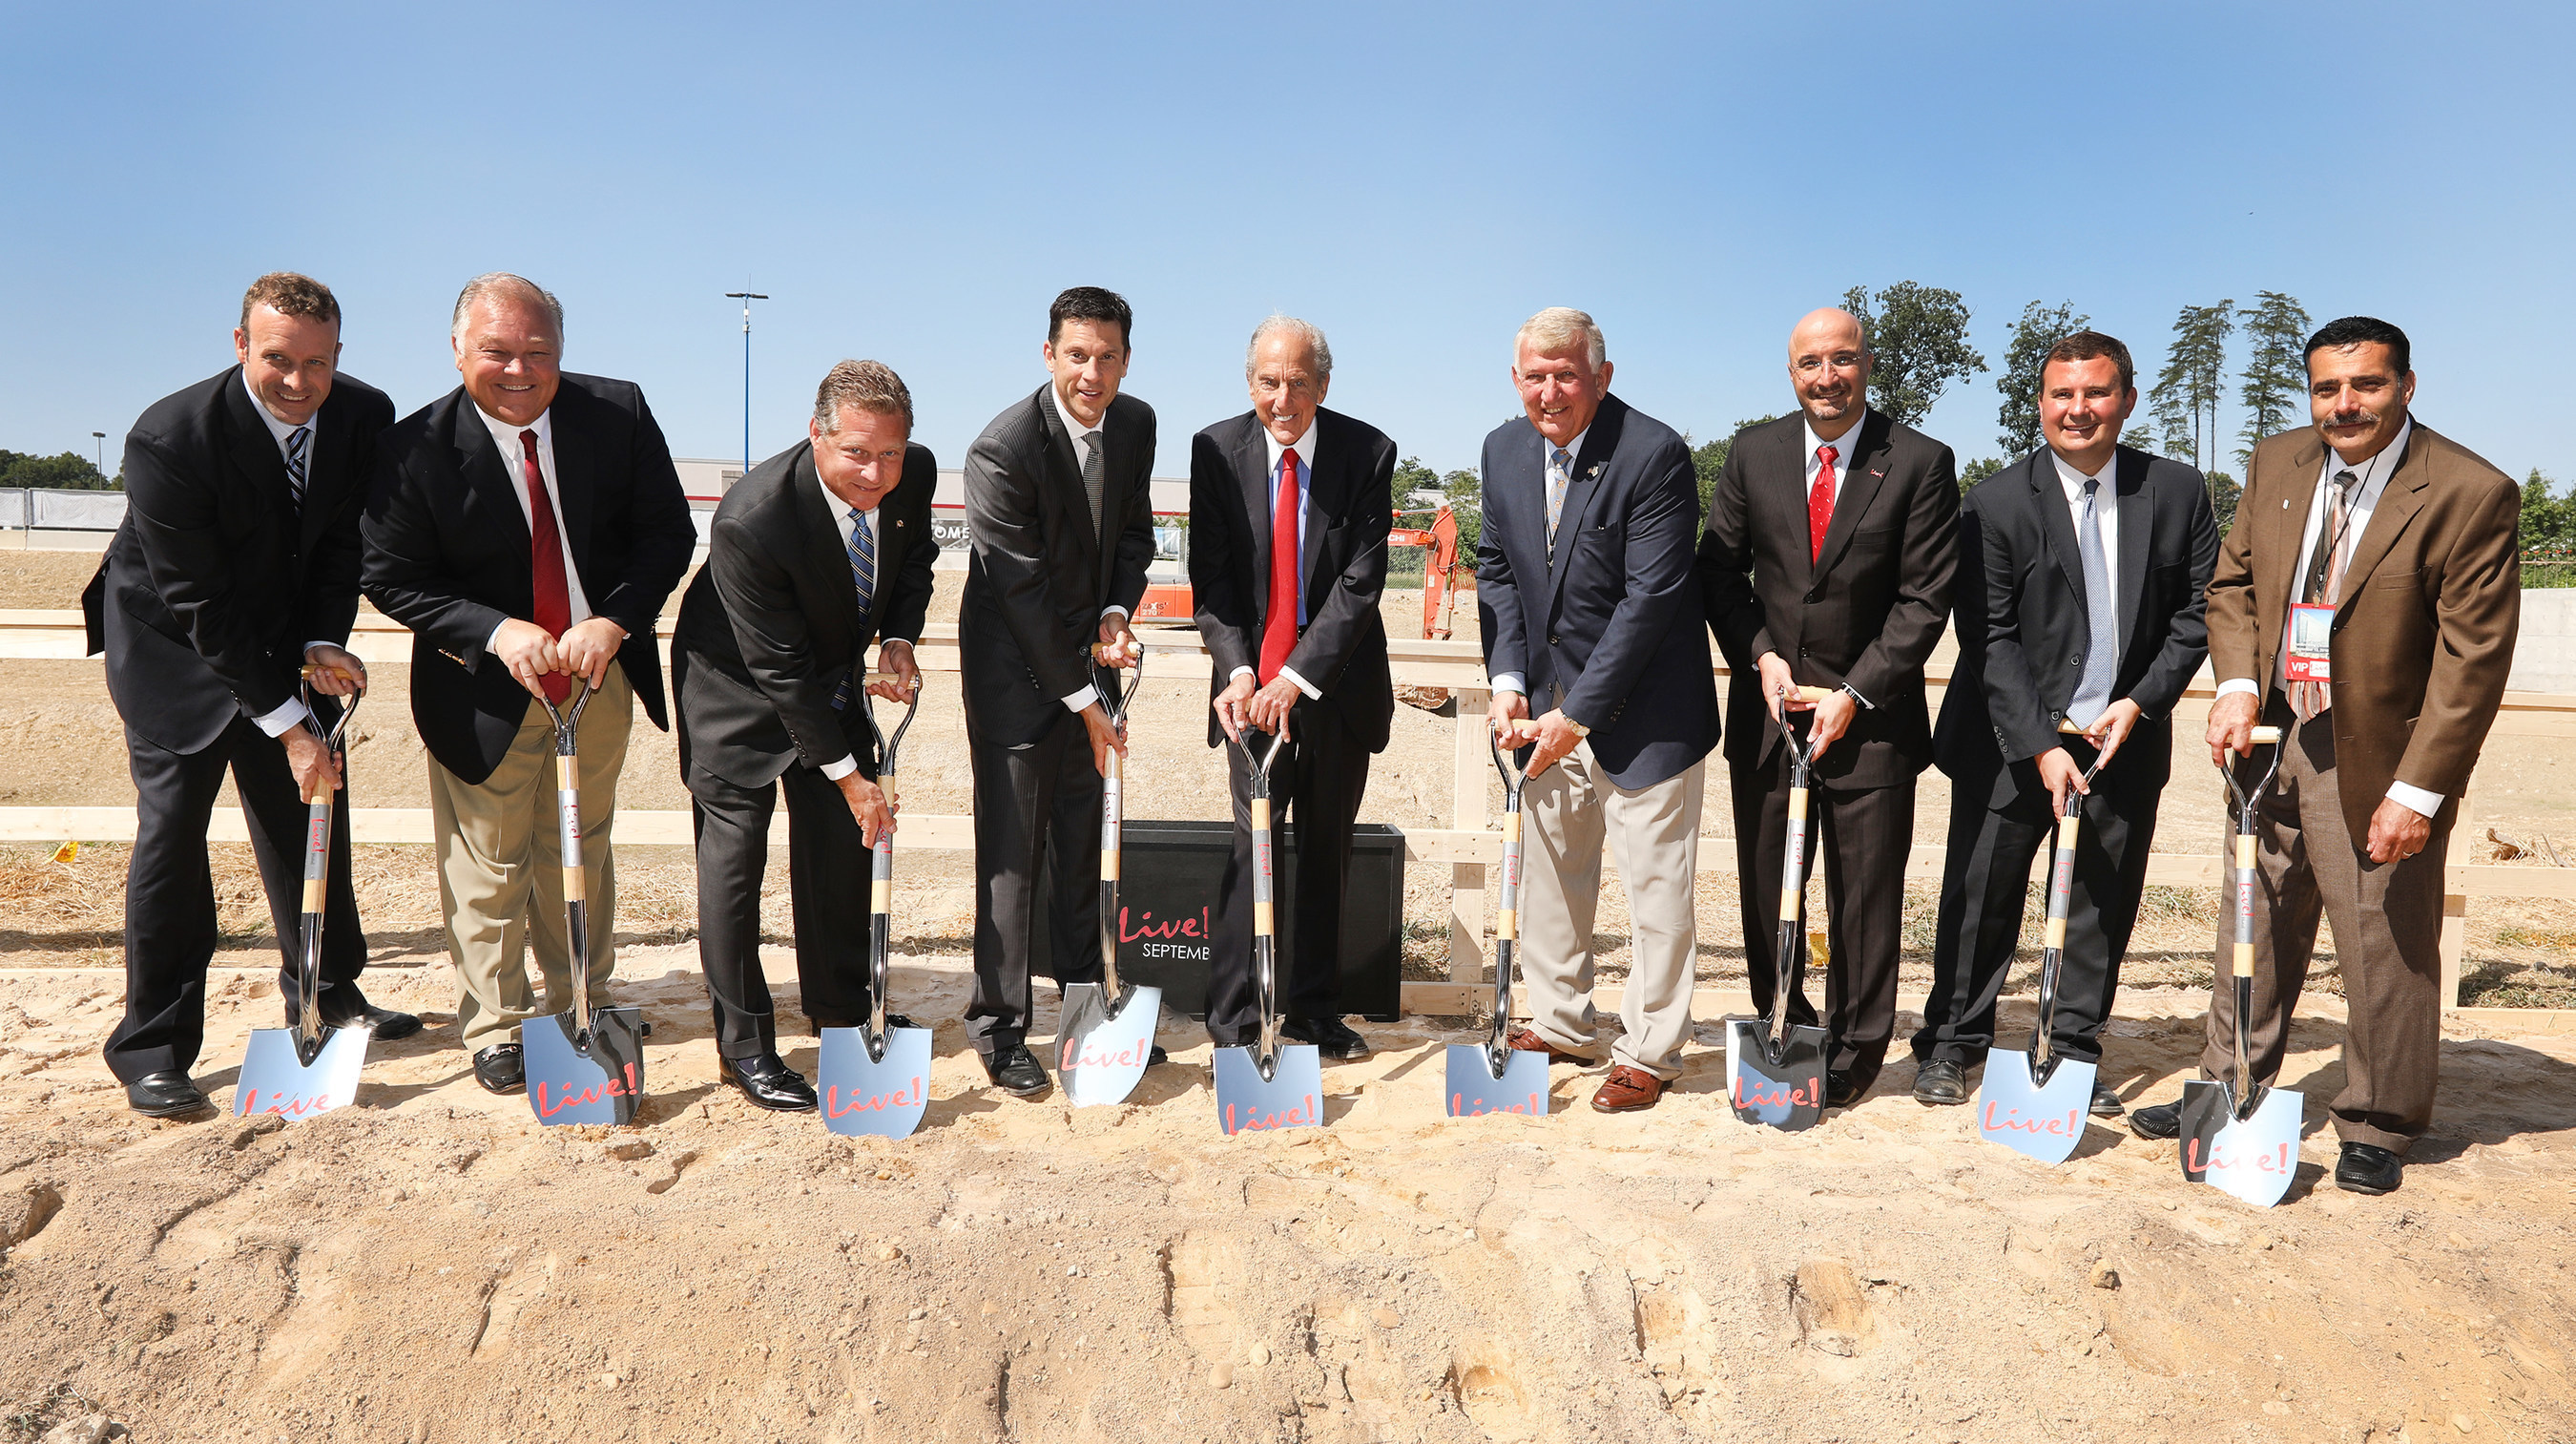 Groundbreaking ceremony for Live! Hotel in Hanover, Maryland. Pictured L to R: Taylor Gray, The Cordish Companies; Doug Shipley, Live! Casino; Anne Arundel County Executive Steven Schuh; Jon Cordish, The Cordish Companies; David Cordish, Chairman, The Cordish Companies; Maryland State Senator Ed DeGrange;